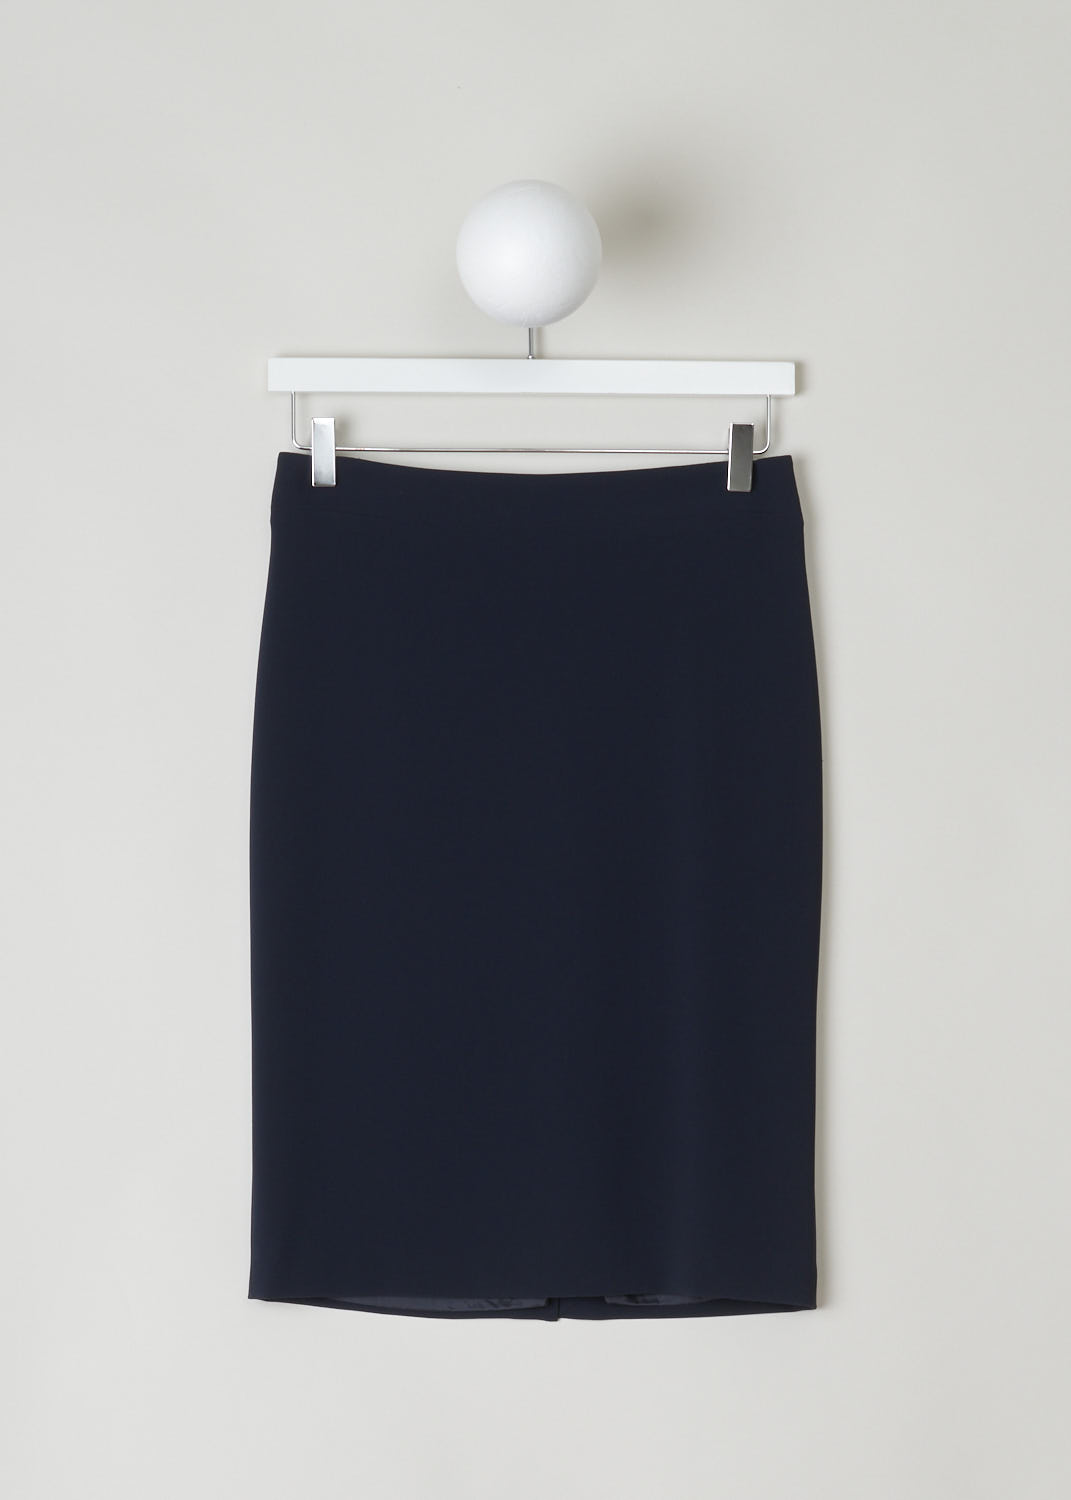 ASPESI, NAVY BLUE PENCIL SKIRT, 2232_2088_10098, Blue. Front, Classic navy blue pencil skirt made from a silky smooth fabric. The skirt has a button and zipper closure in the back. A center slip can also be found in the back.
